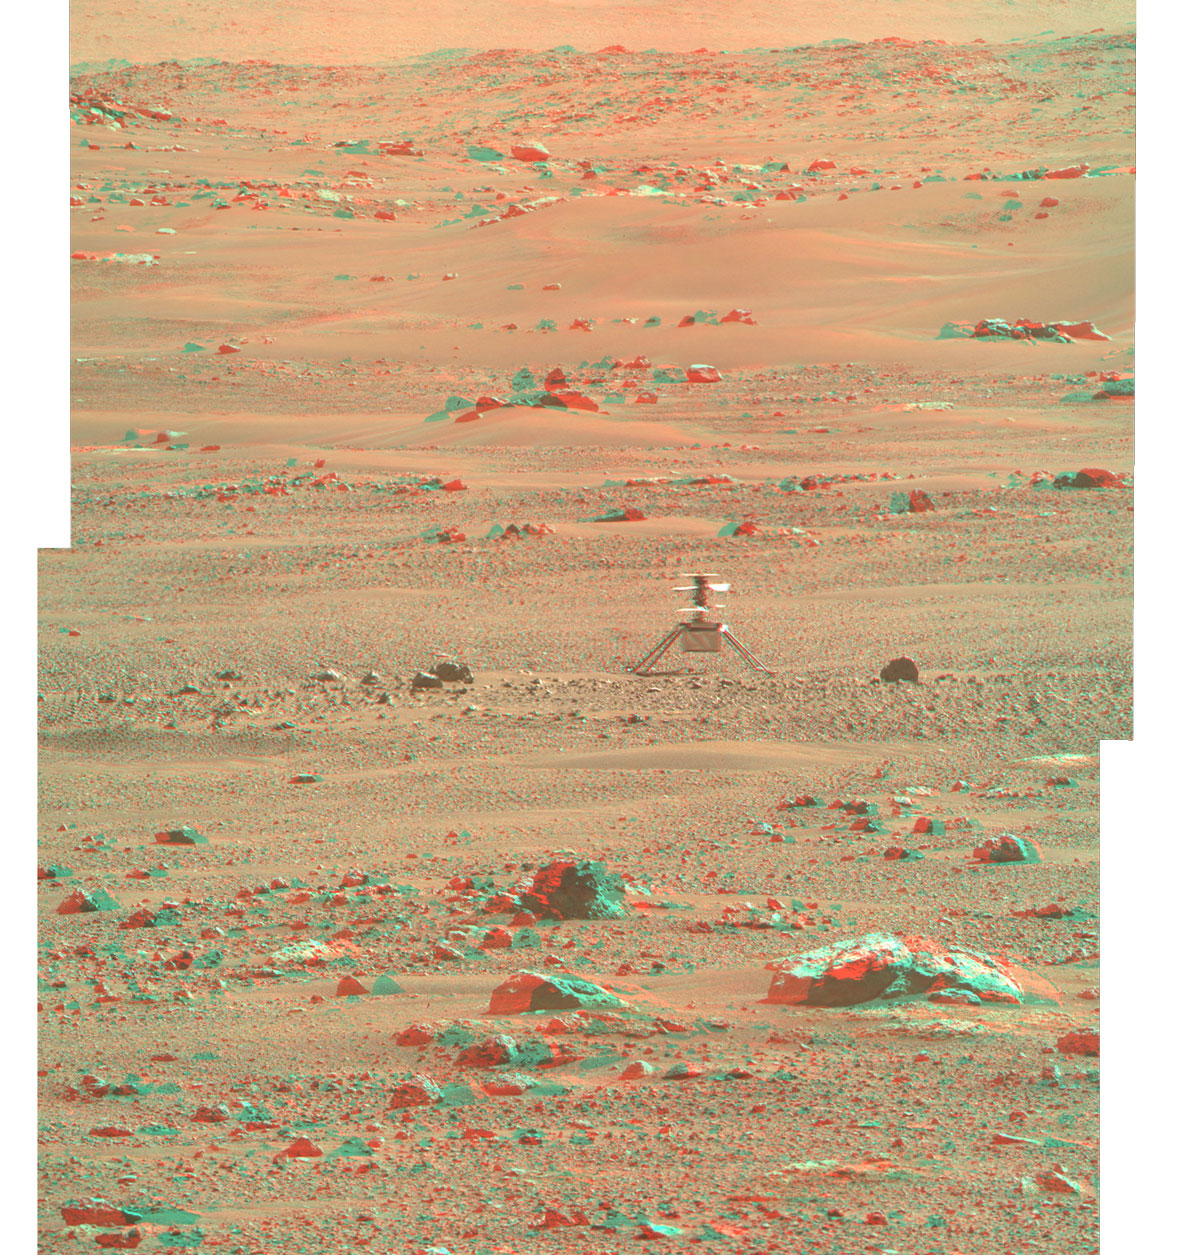 Ingenuity Mars Helicopter is seen here in 3D using images taken June 6, 2021, by the left and right Mastcam-Z cameras aboard NASA’s Perseverance Mars rover. 